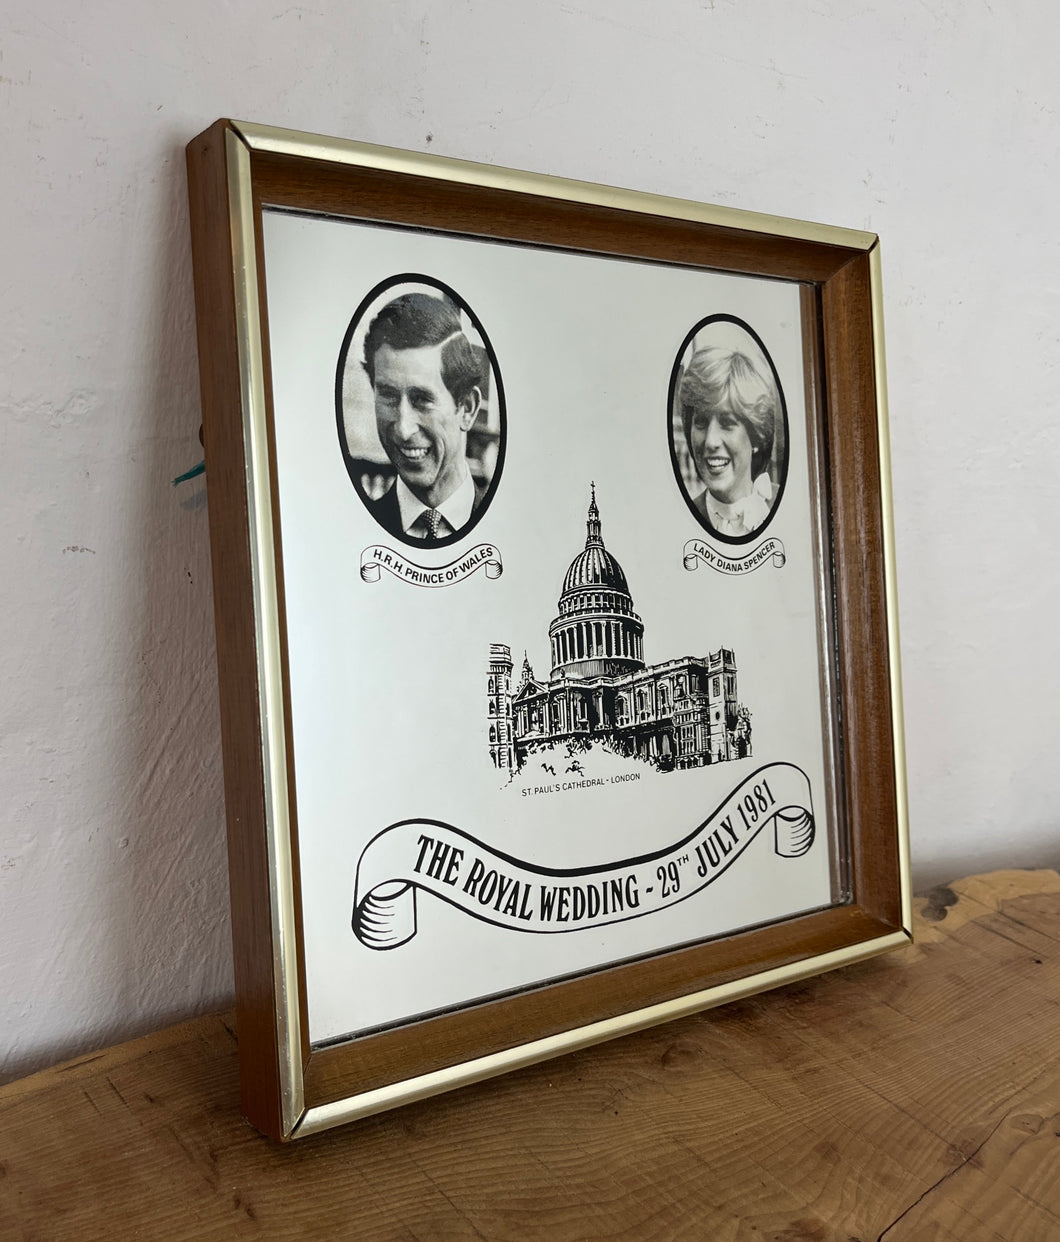 Vibrant mirror featuring the wedding of Charles and Diana on the 29th of July 1981 with a portrait of the couple and intricate picture of St Pauls and the fonts in a banner design.